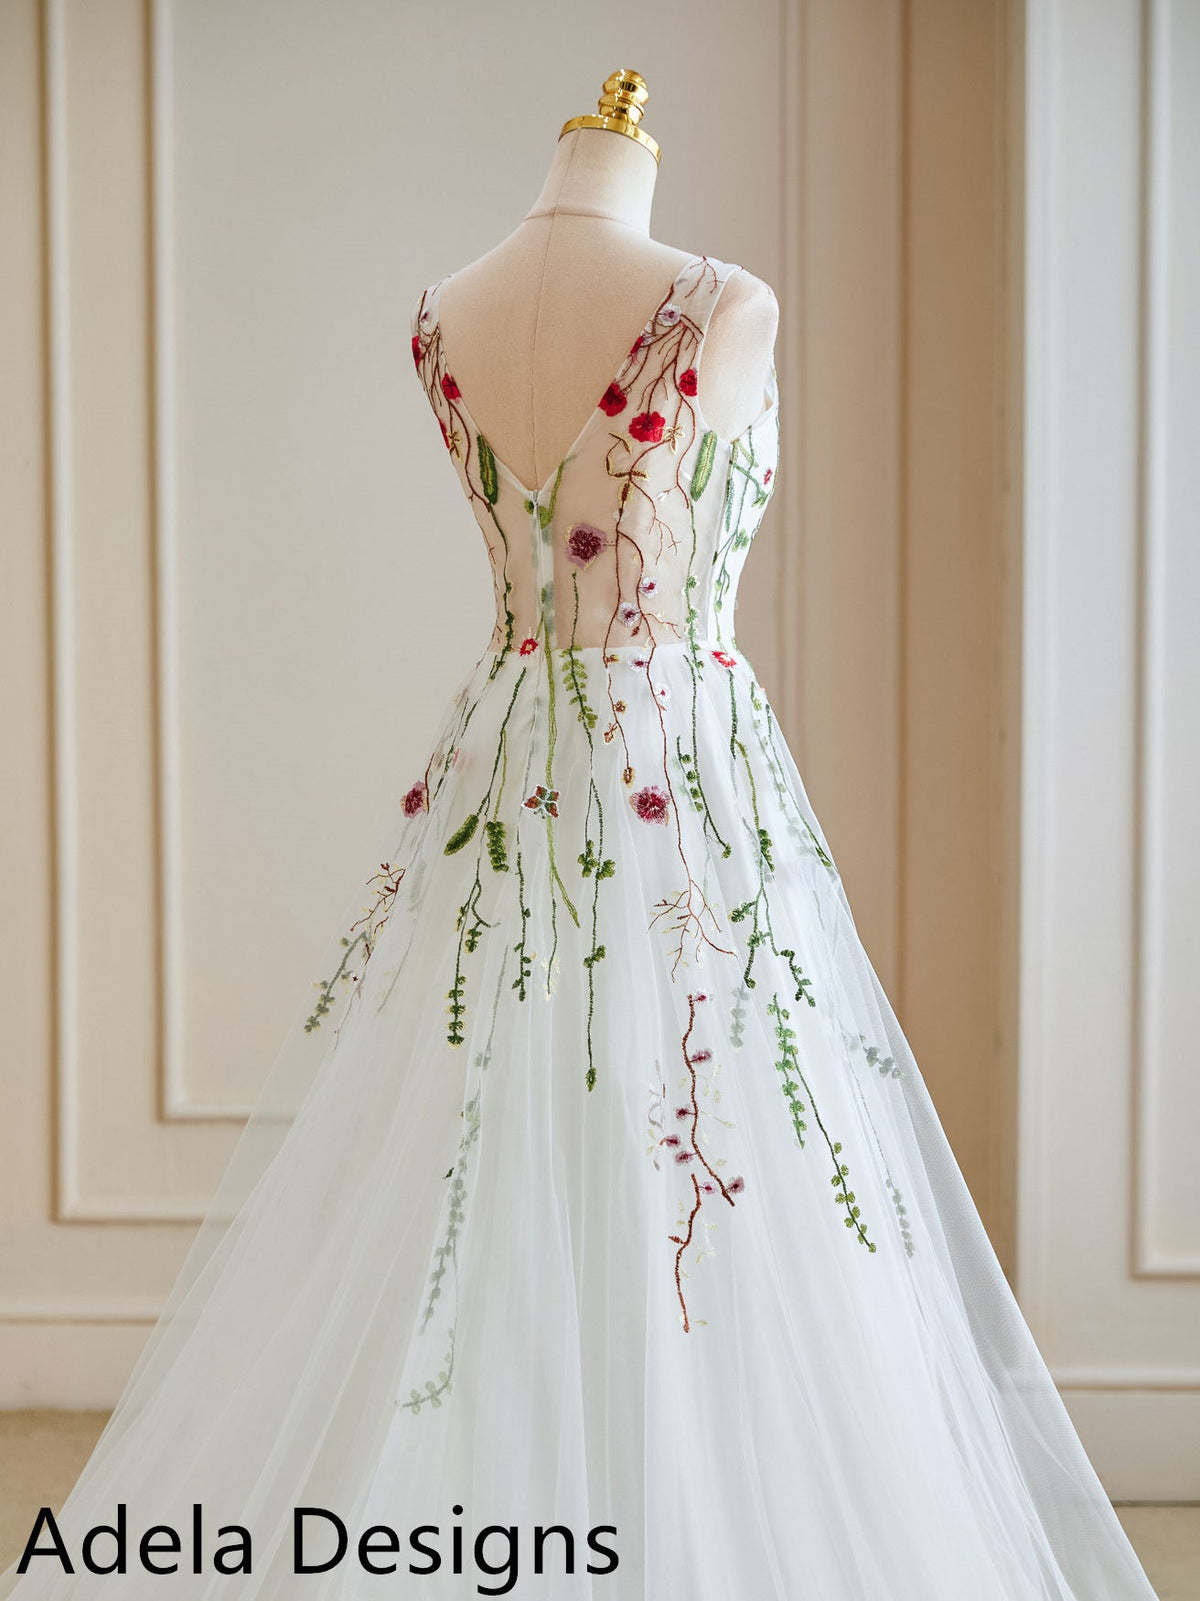 Floral Embroidery Lace Colorful Simple Tulle Sleeveless V Neck Wedding Dress Bridal Gown Aline with Train Boho Style